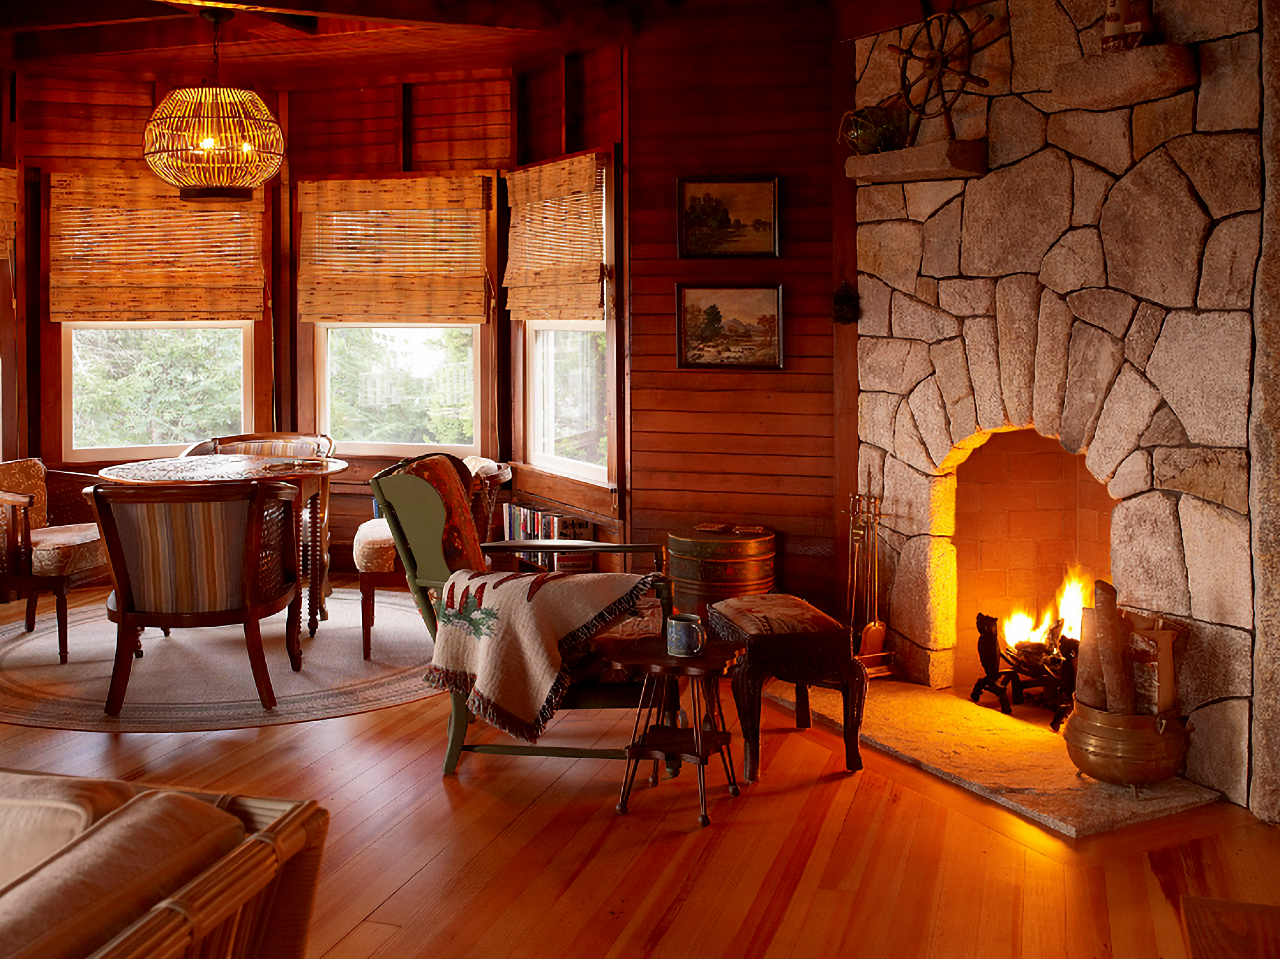 Cabin style living room with stone fireplace in a Maine bunk house